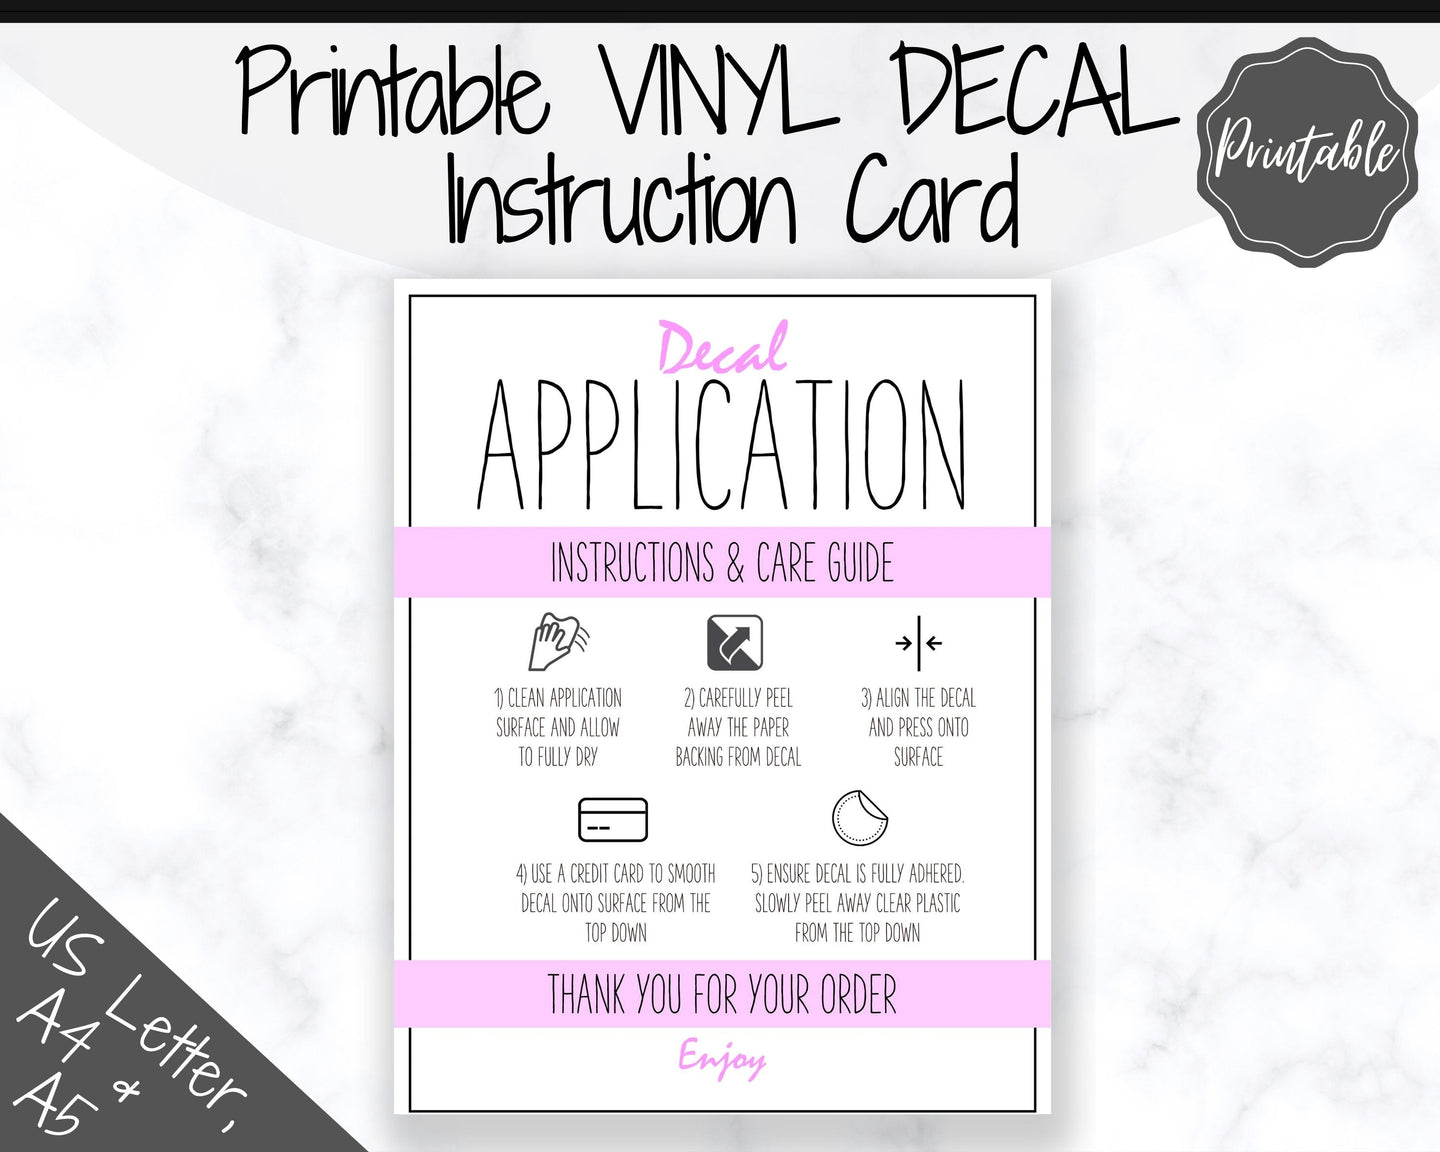 Printable Vinyl Decal Care Card Instructions. Decal Application Order Card, DIY Sticker Seller Packaging Label, Vinyl Decal Care Cards | Purple